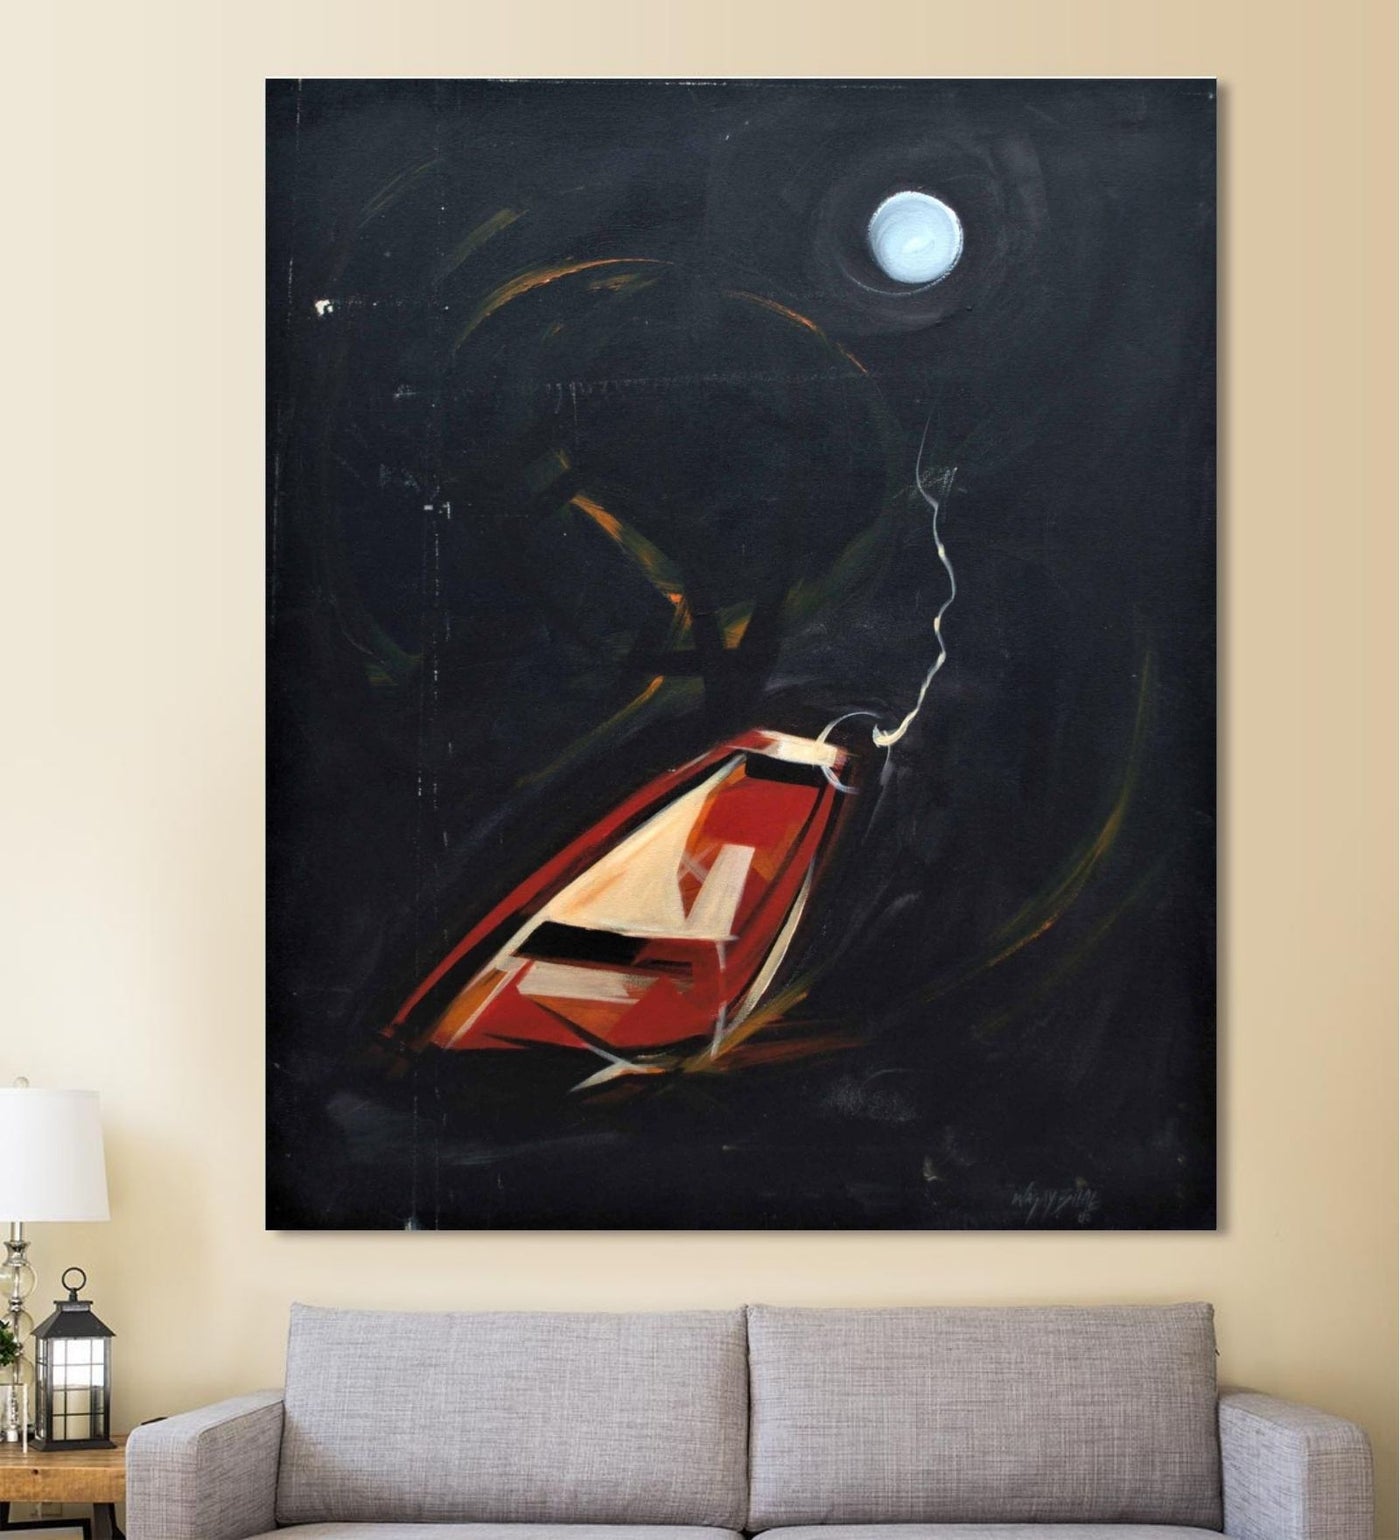 Moon and Boat in Conversation - Wall Decor - 1